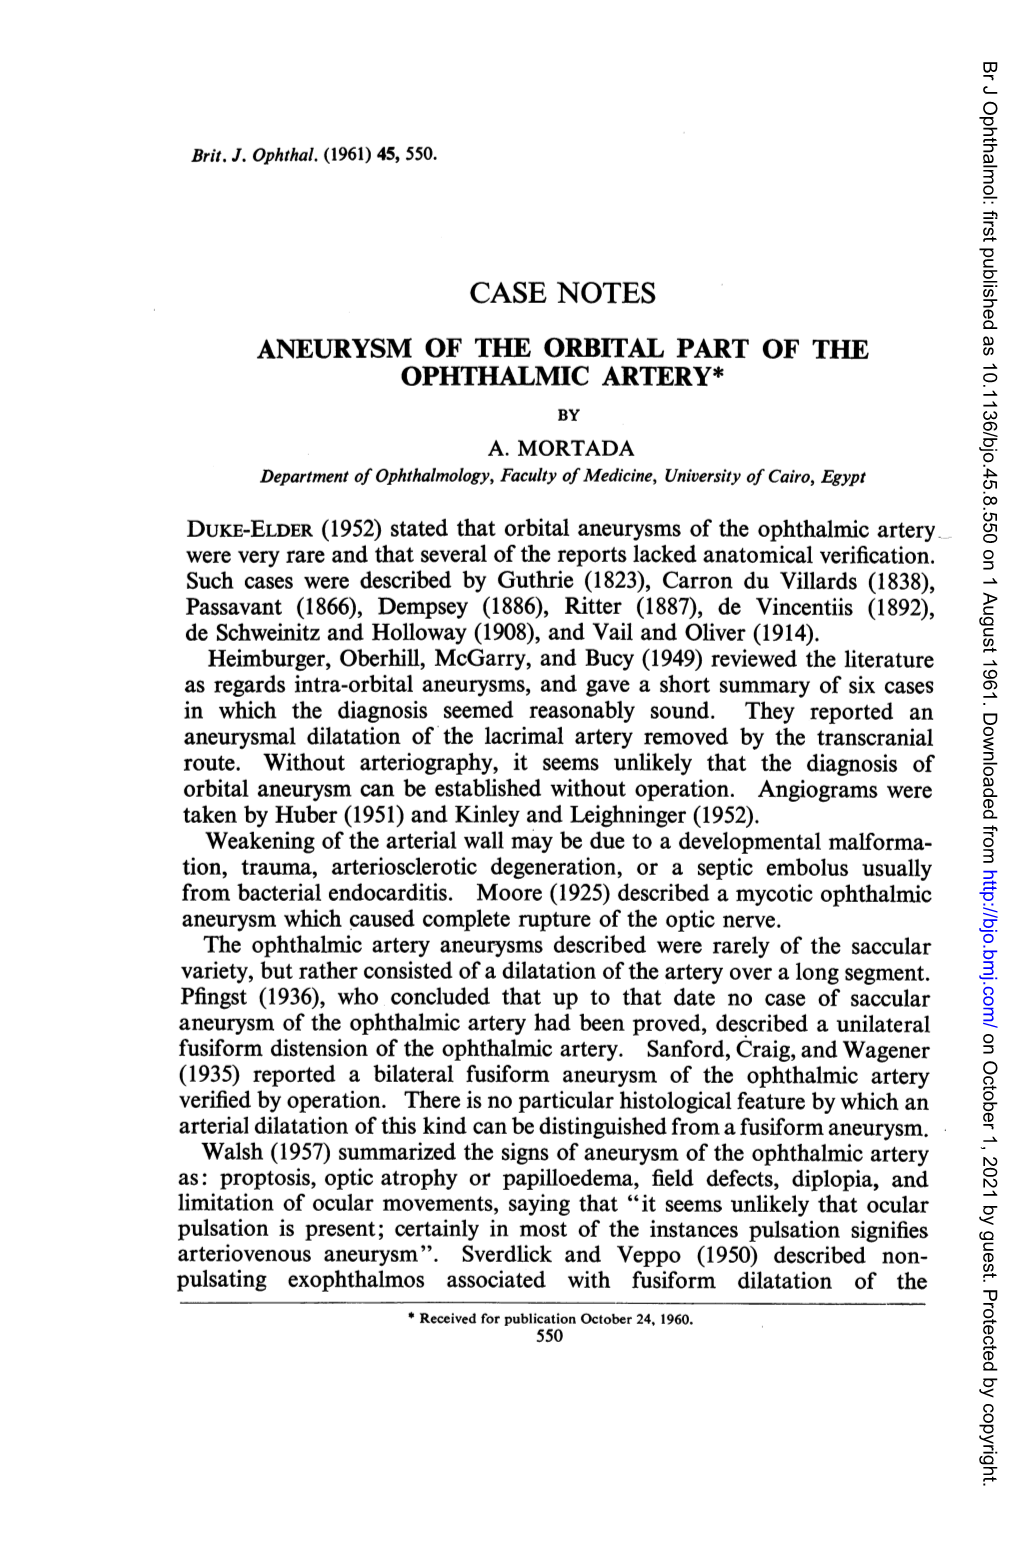 Case Notes Aneurysm of the Orbital Part of the Ophthalmic Artery* by A